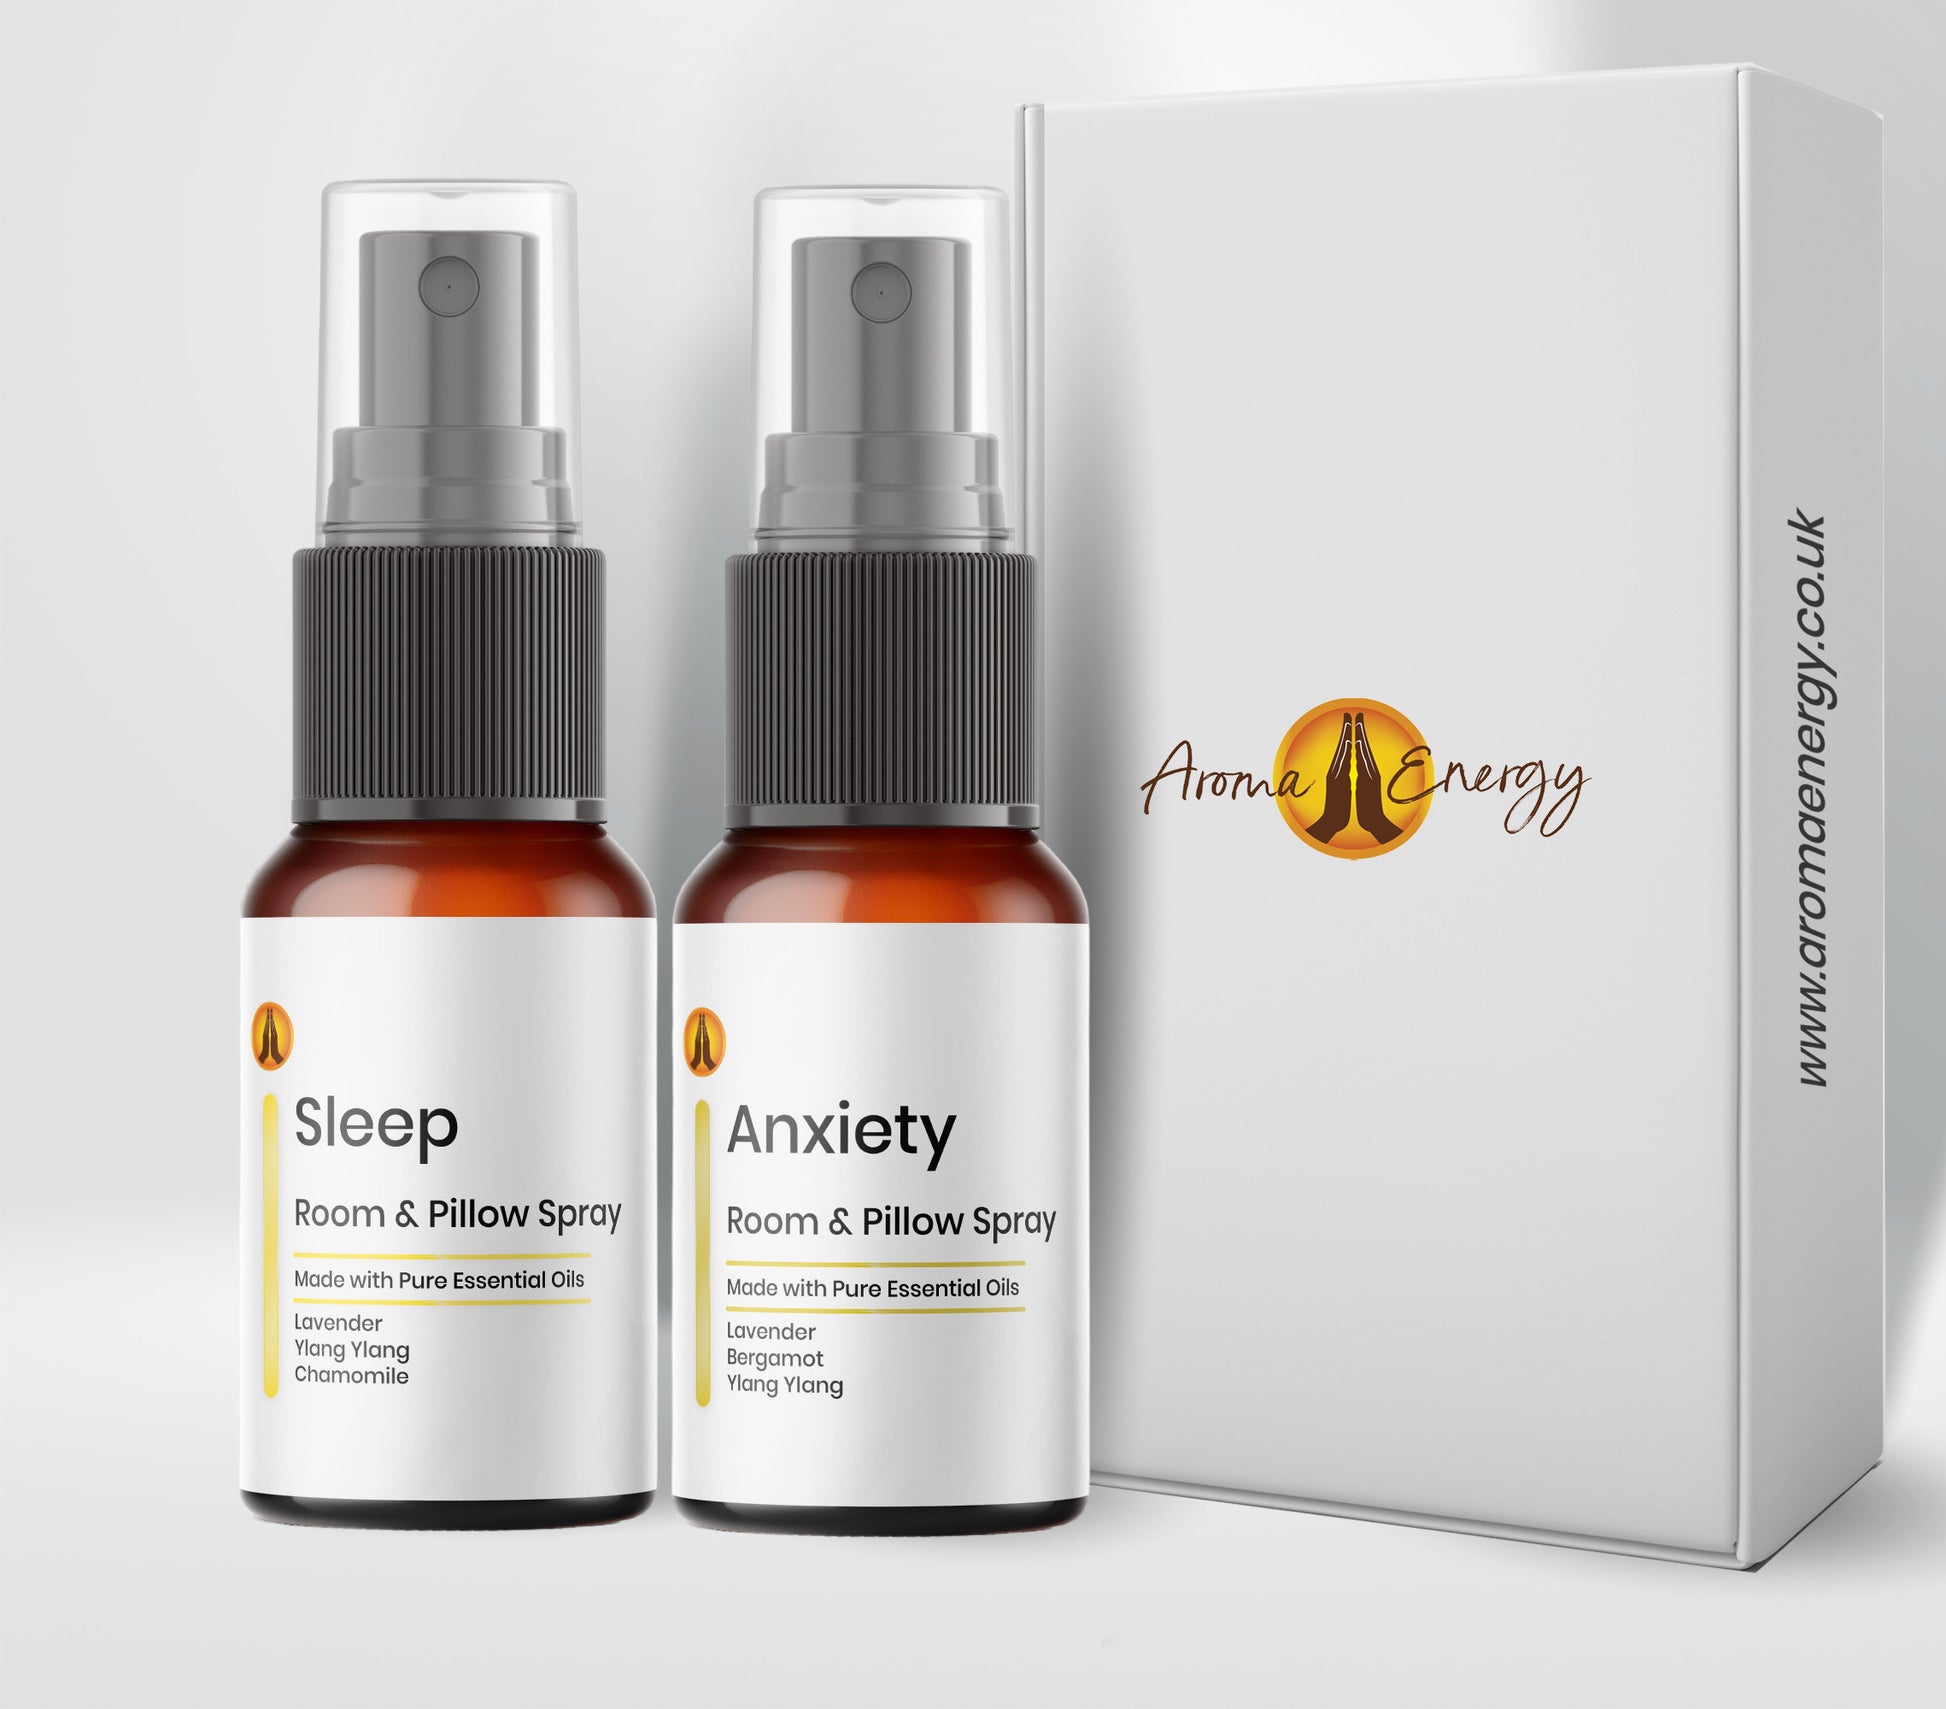 pillow spray for better sleep and help with anxiety